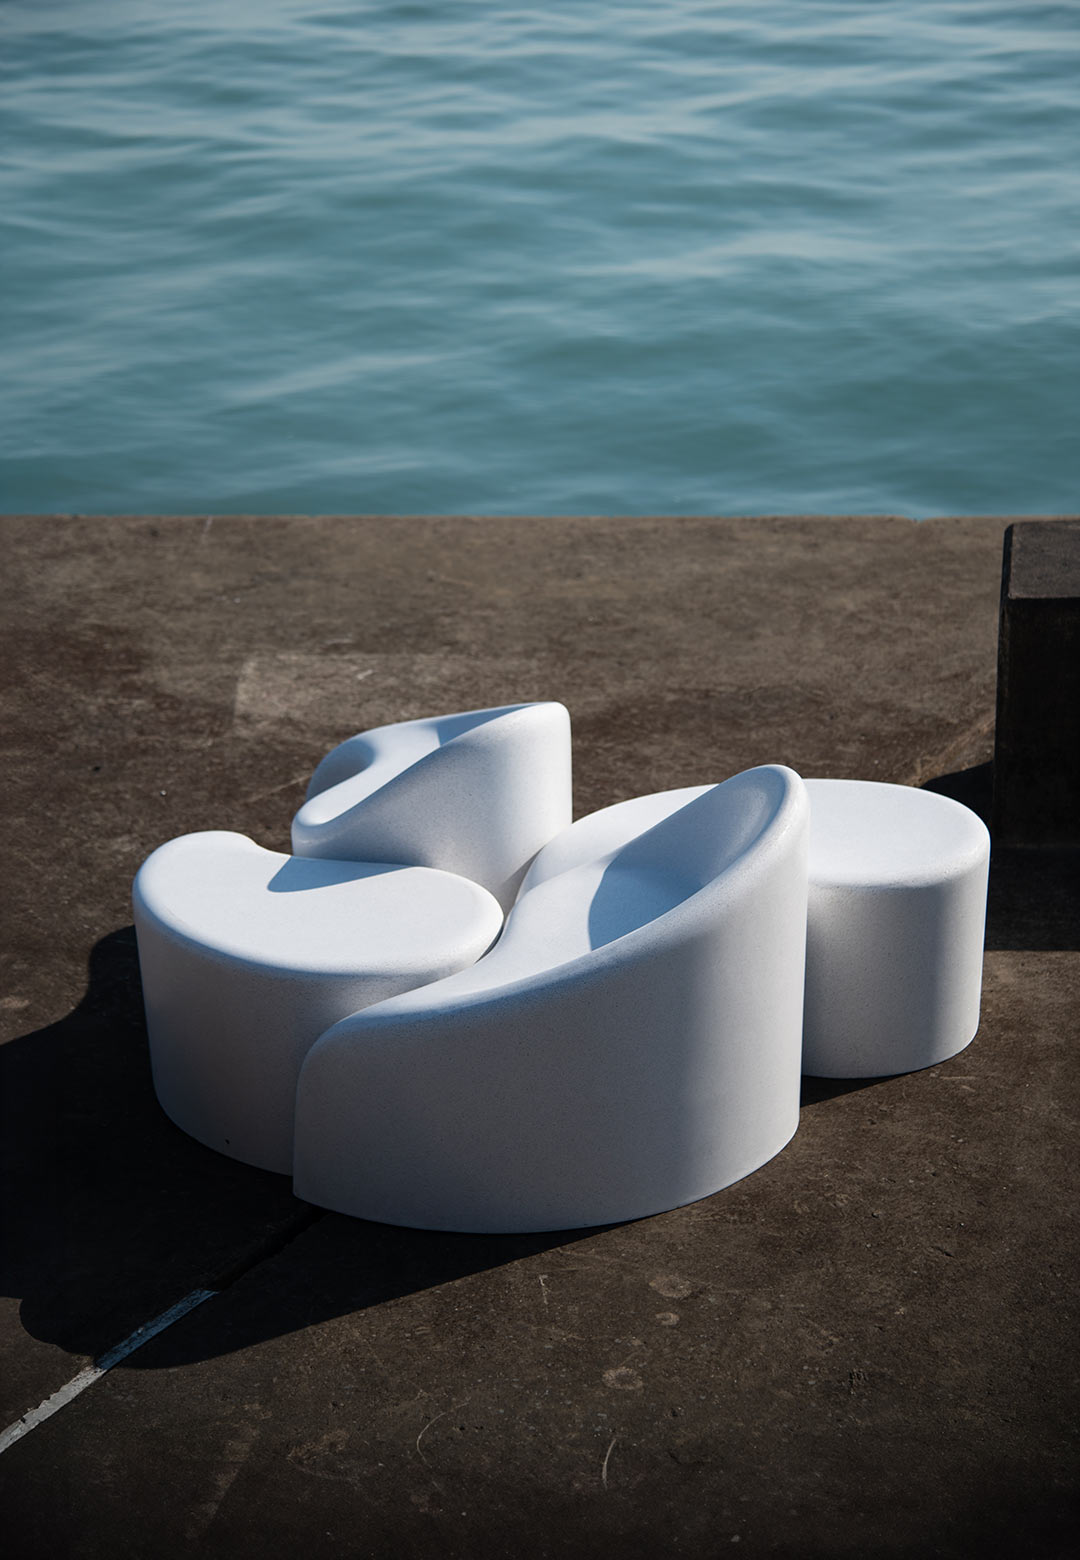 'Polli' by Karim Rashid is a modular stool designed for multiple functions